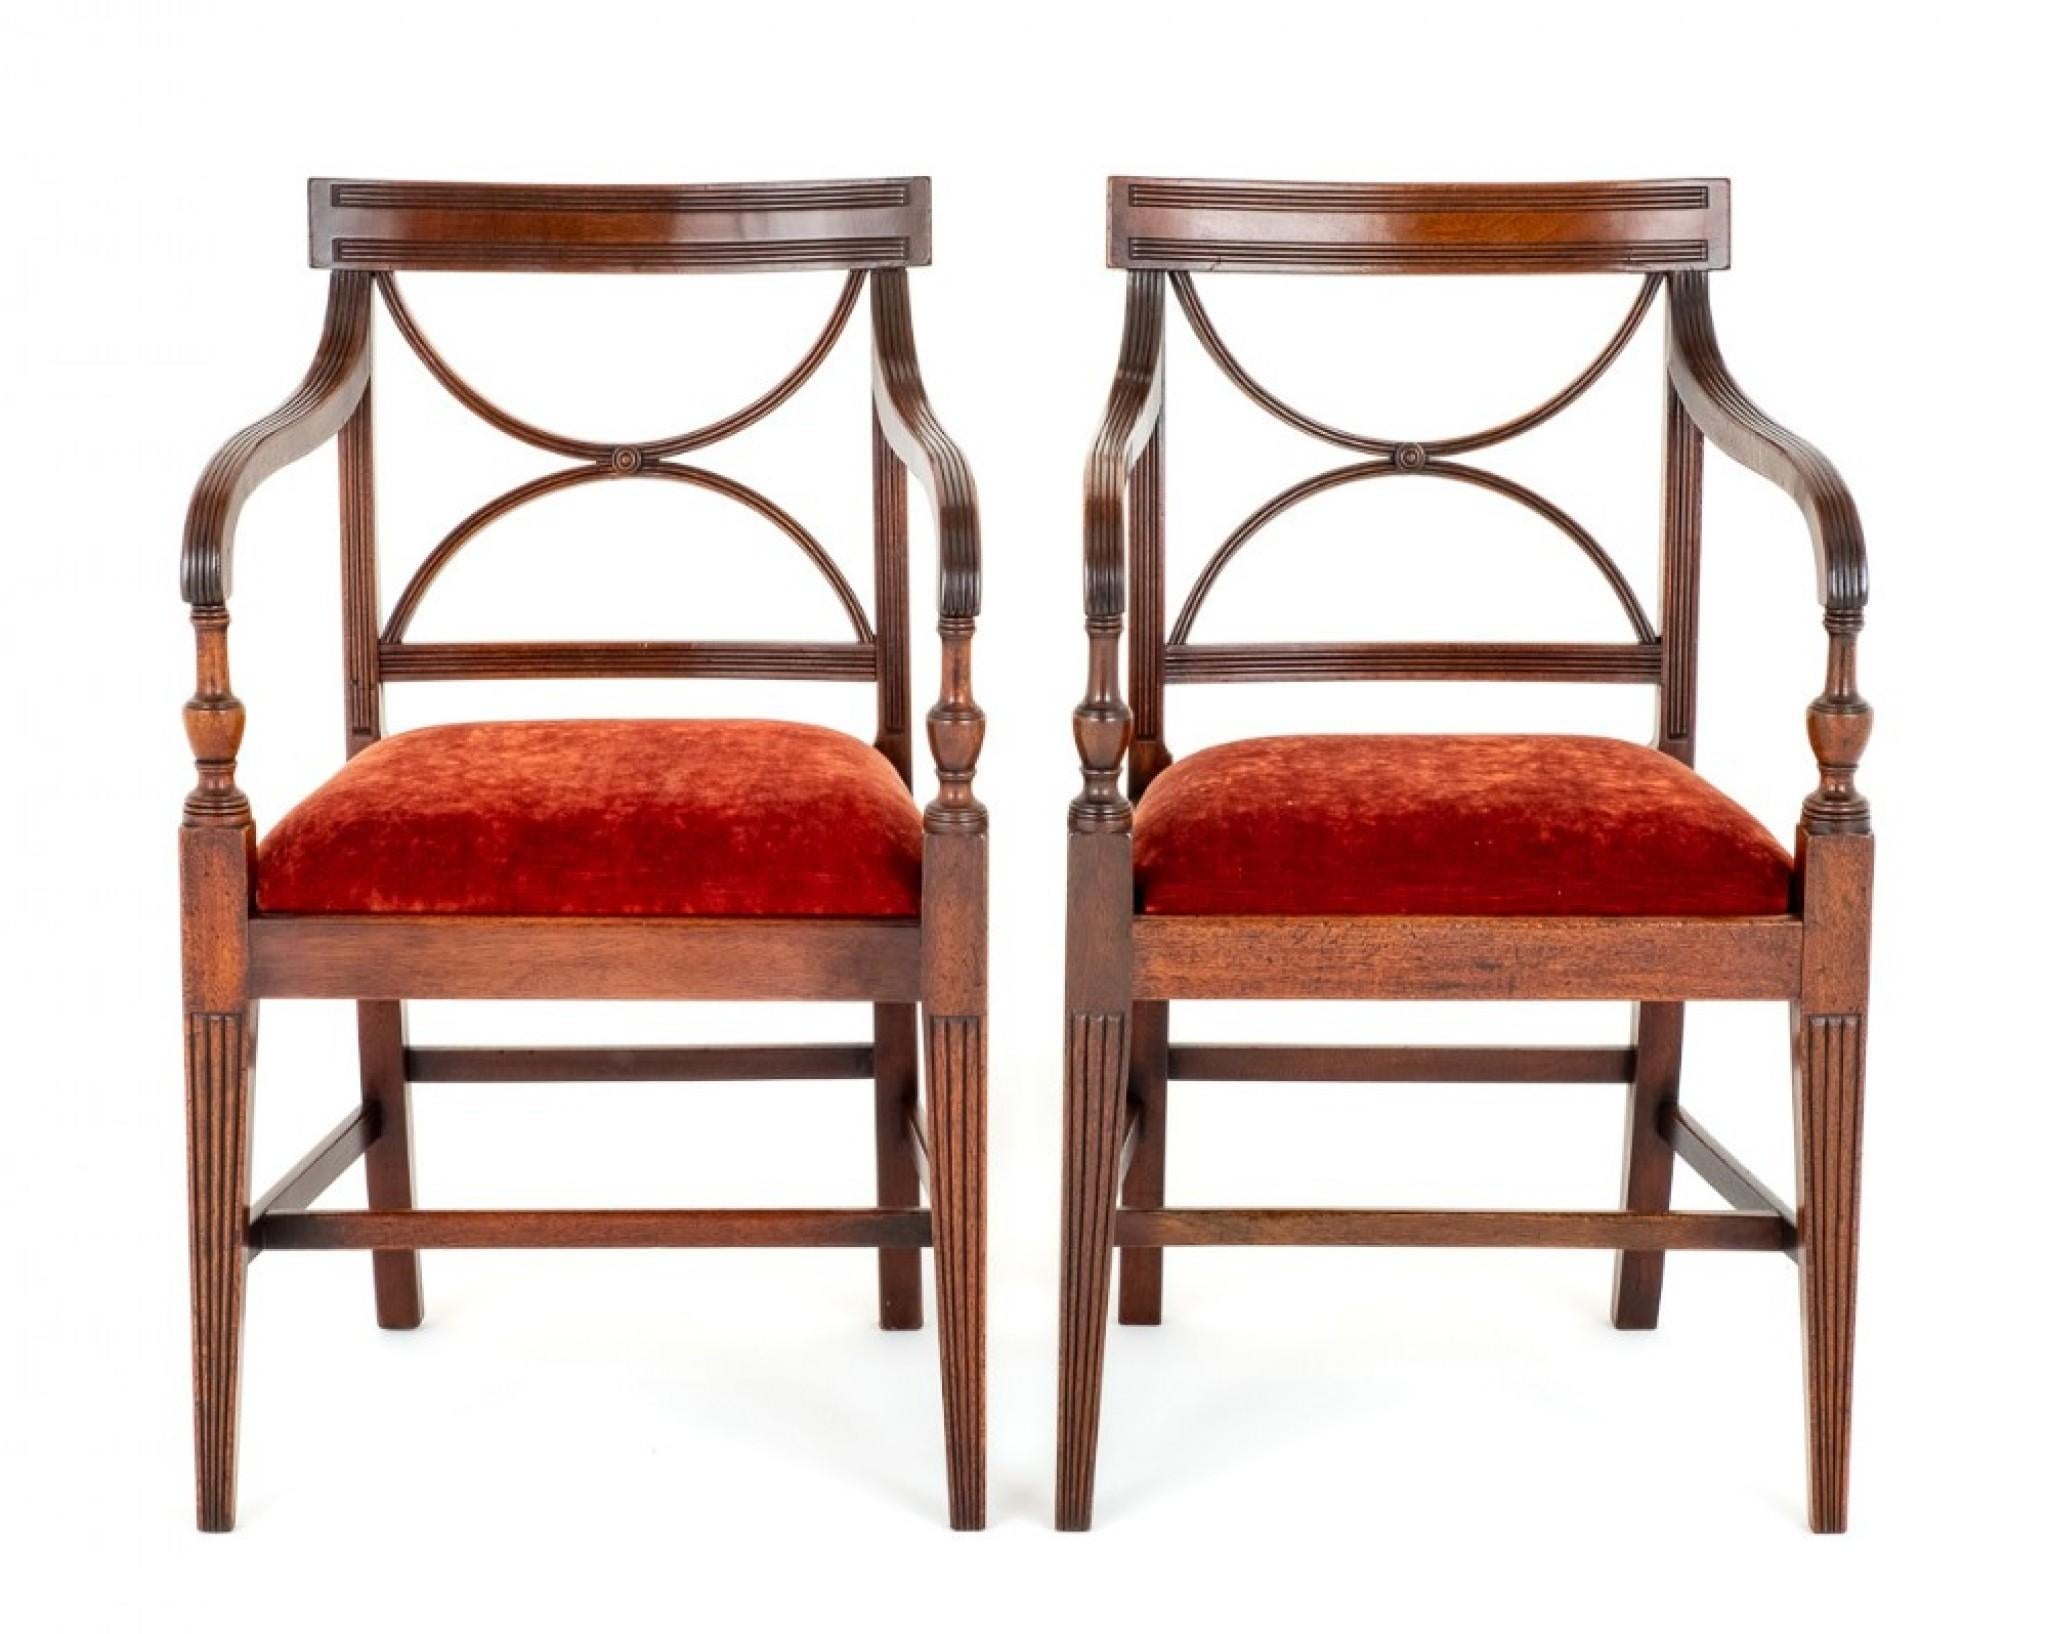 Pair of Mahogany Regency Open Arm Chairs.
Regency Period
These Chairs Stand Upon Tapered Legs, the Front Legs Having Fluted Decoration.
The Chairs Having an 